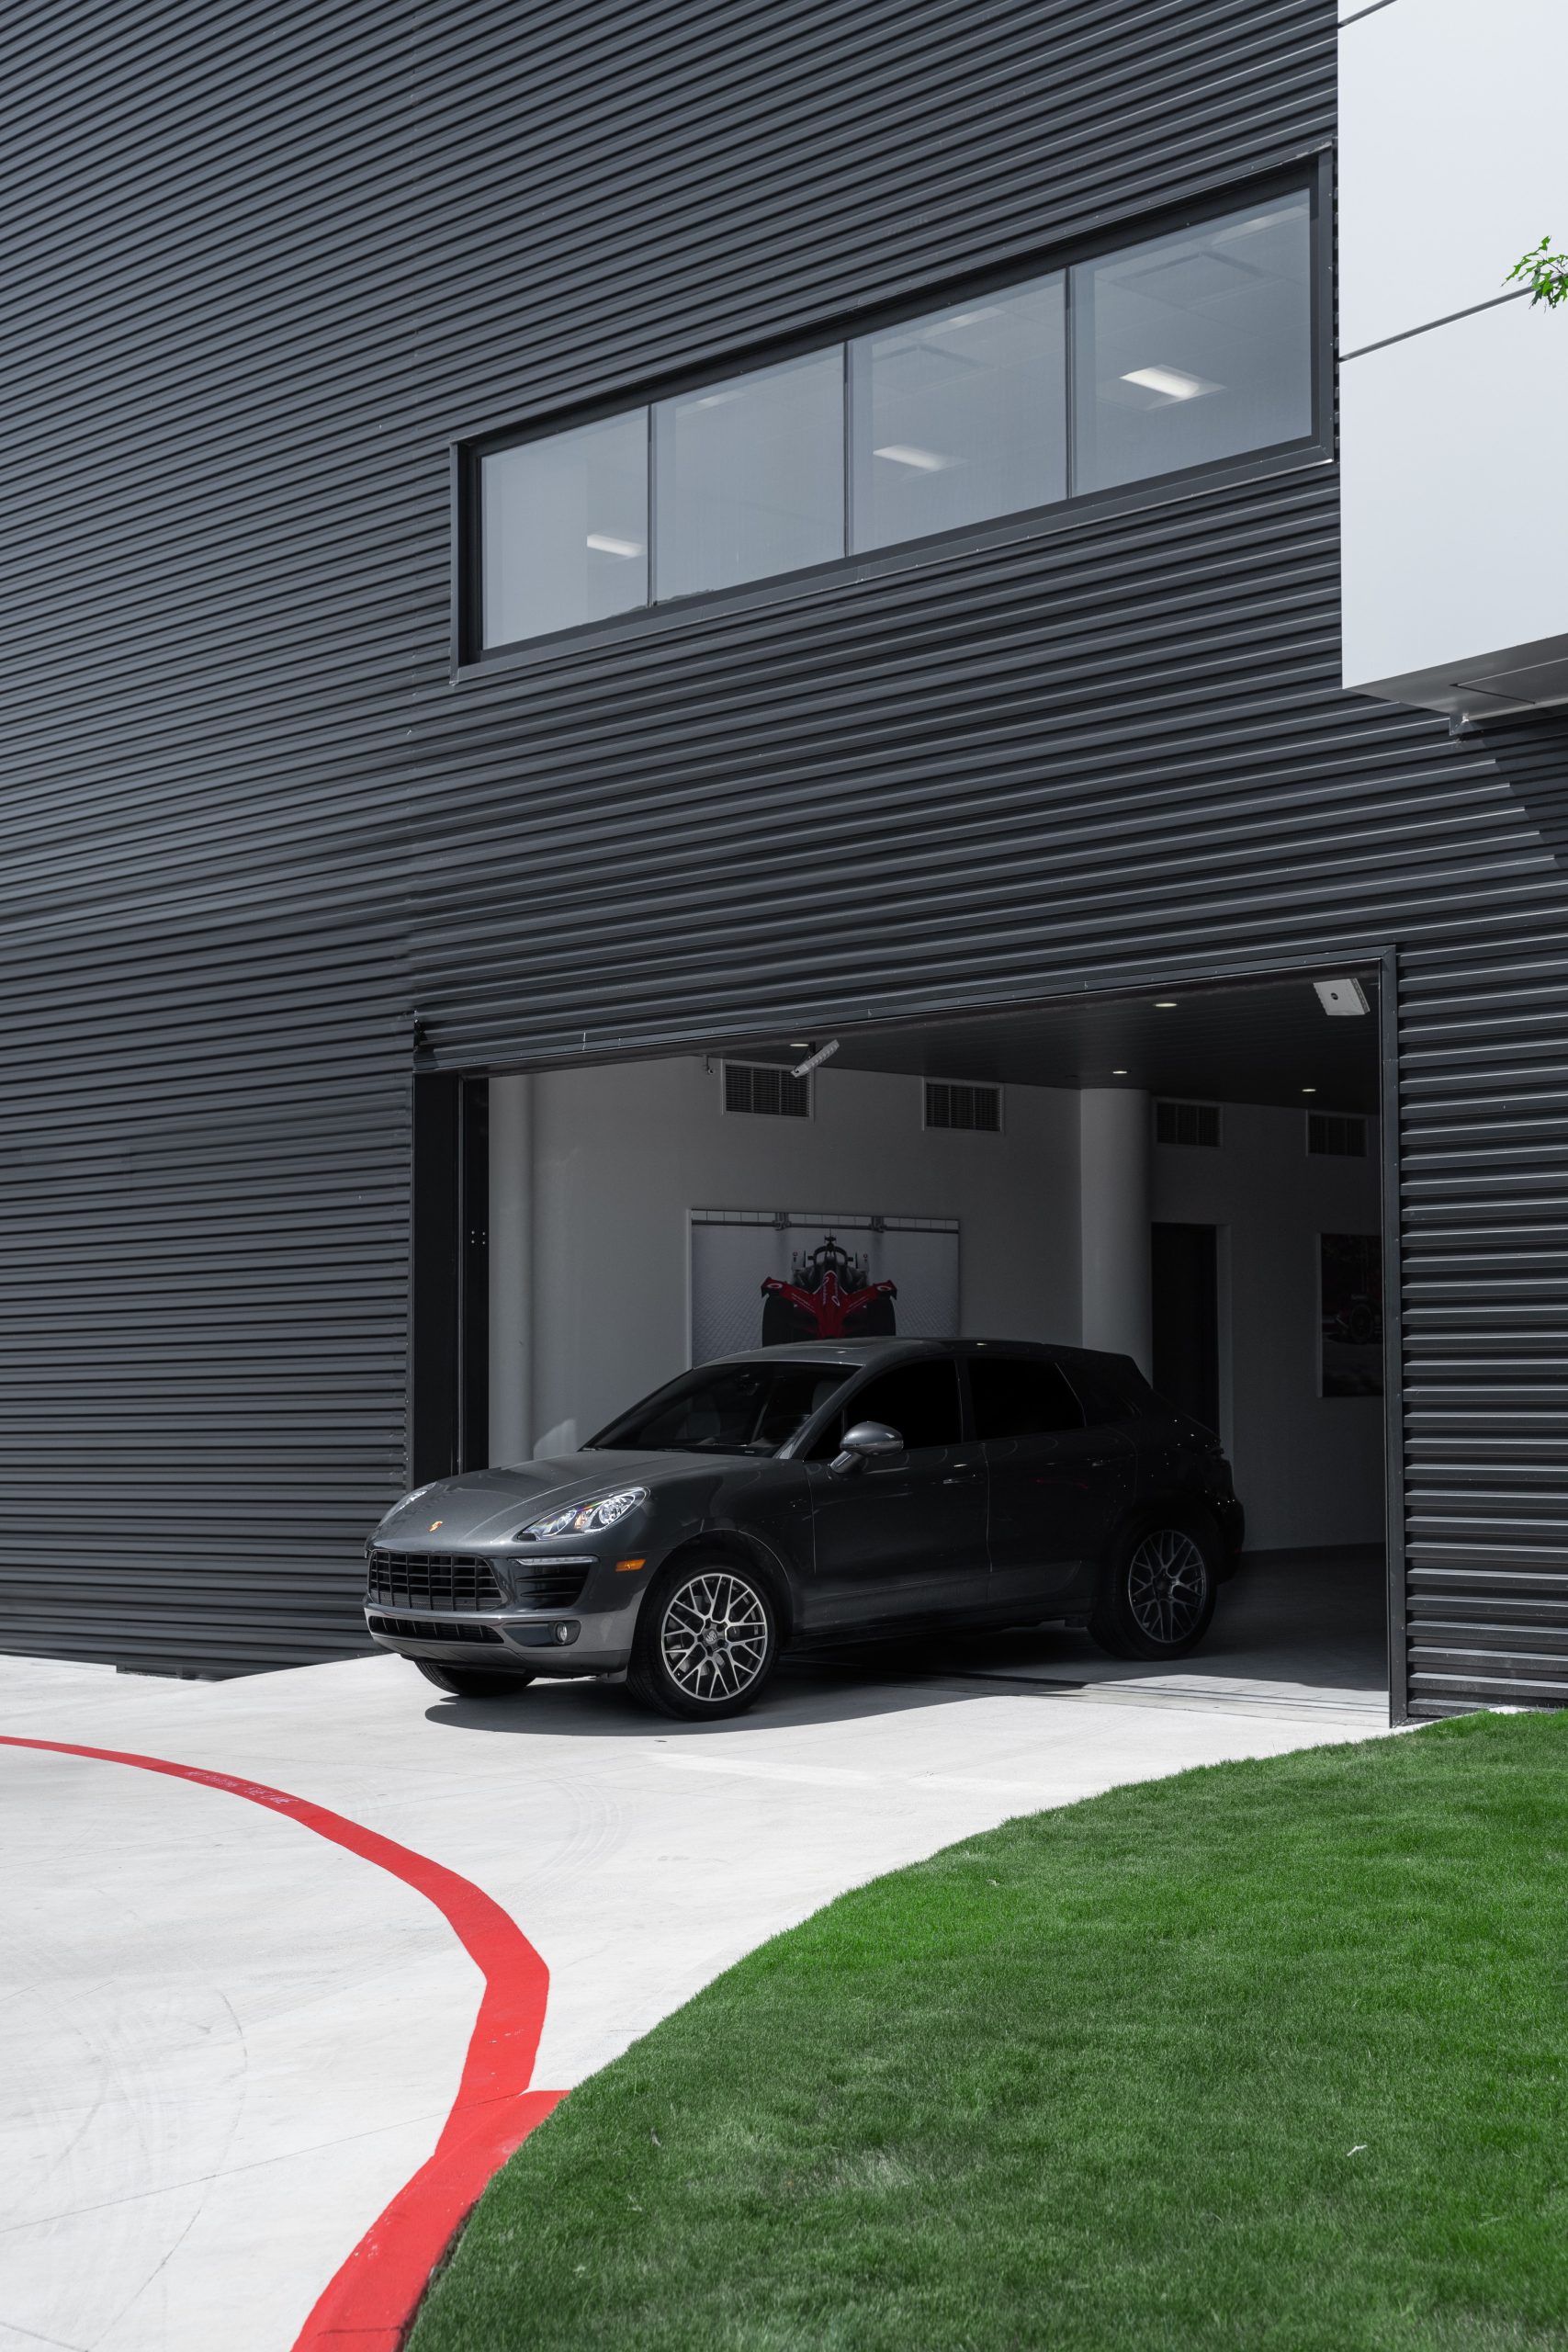 How much does a garage cost?